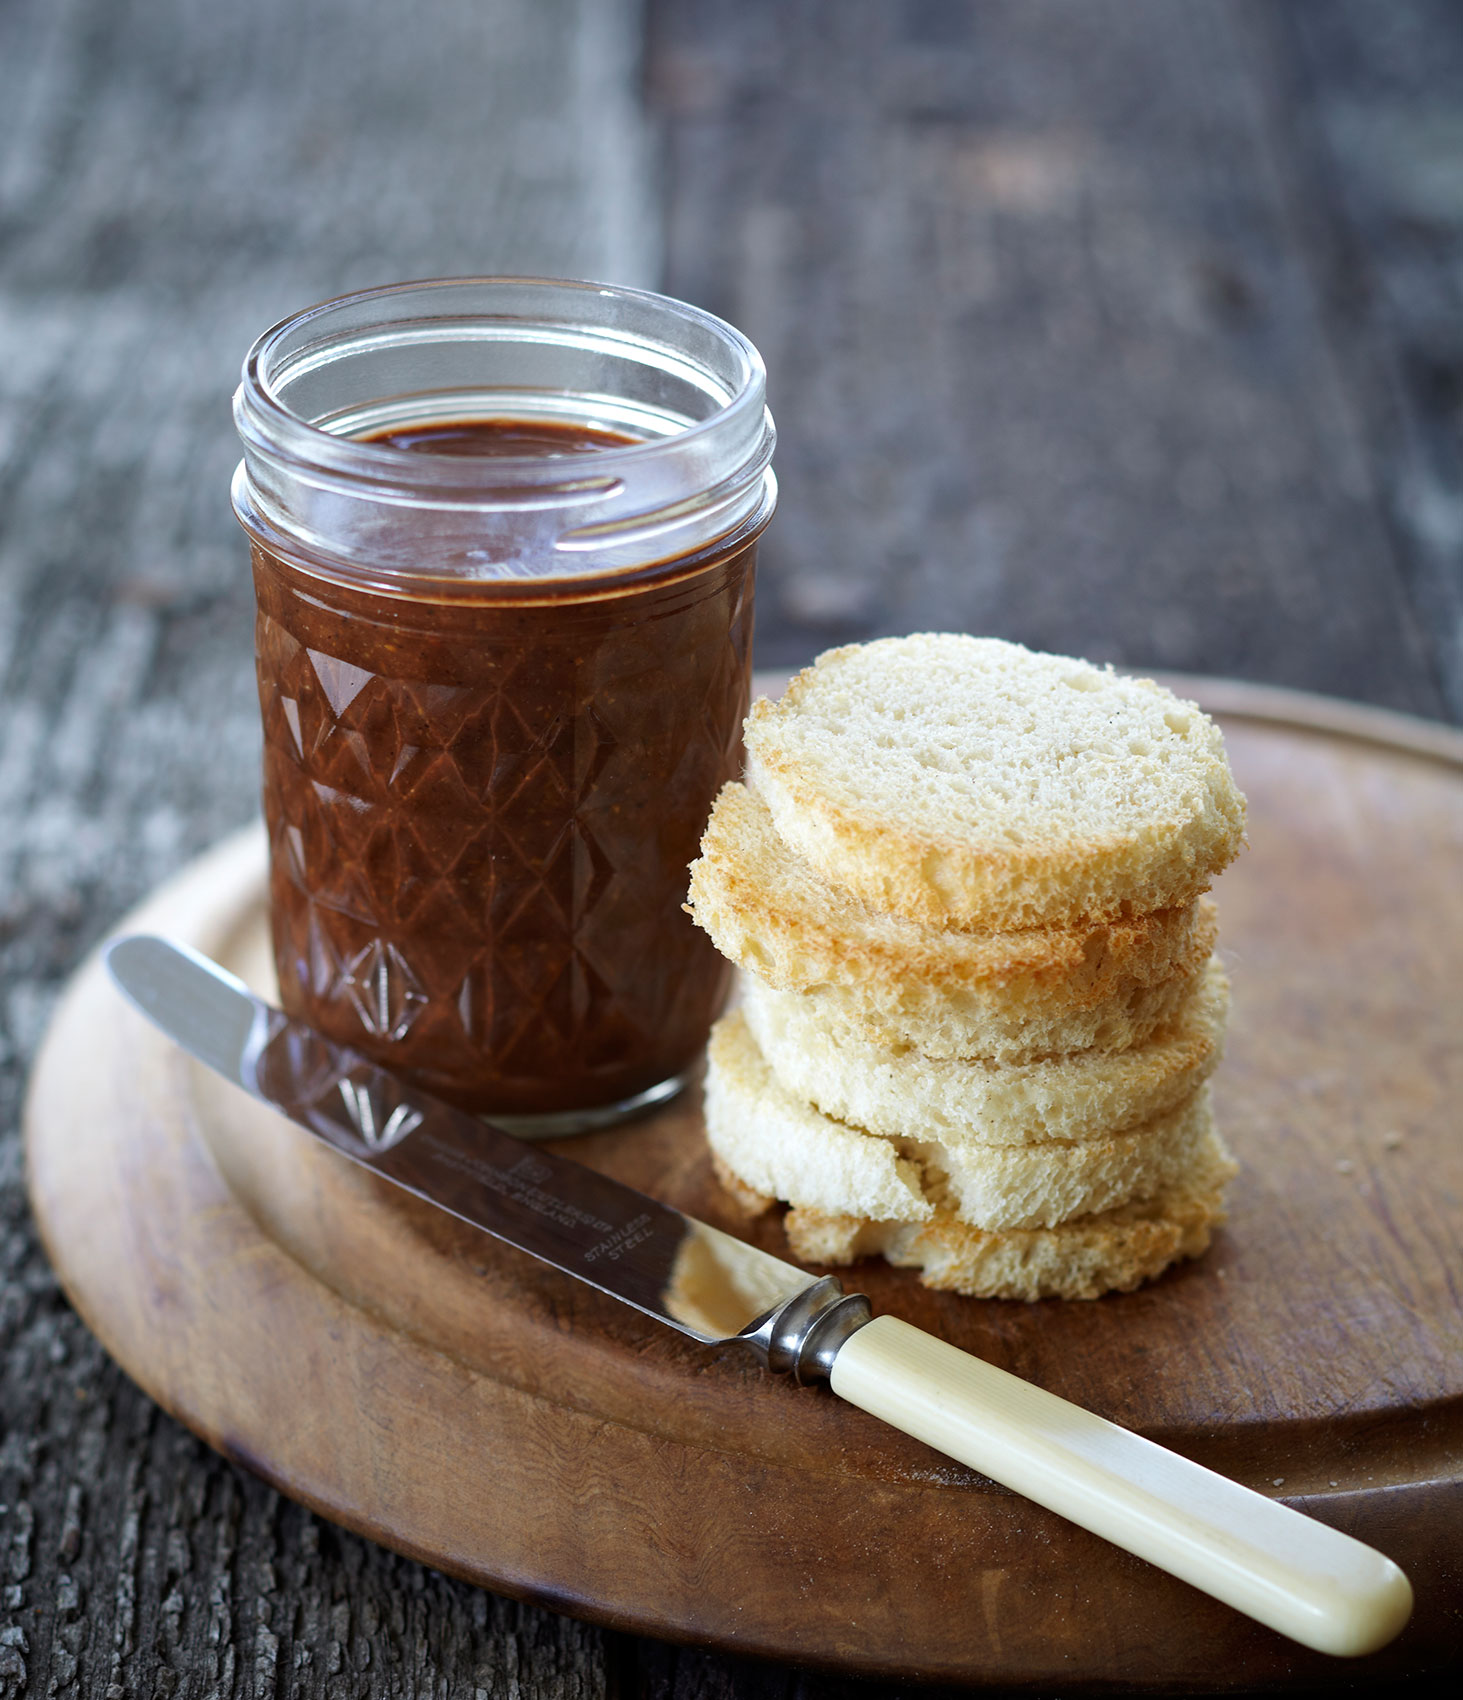 Free Range in the City • Home-Made Chocolate Spread in Retro Glass Jar • Cookbook & Lifestyle Food Photography